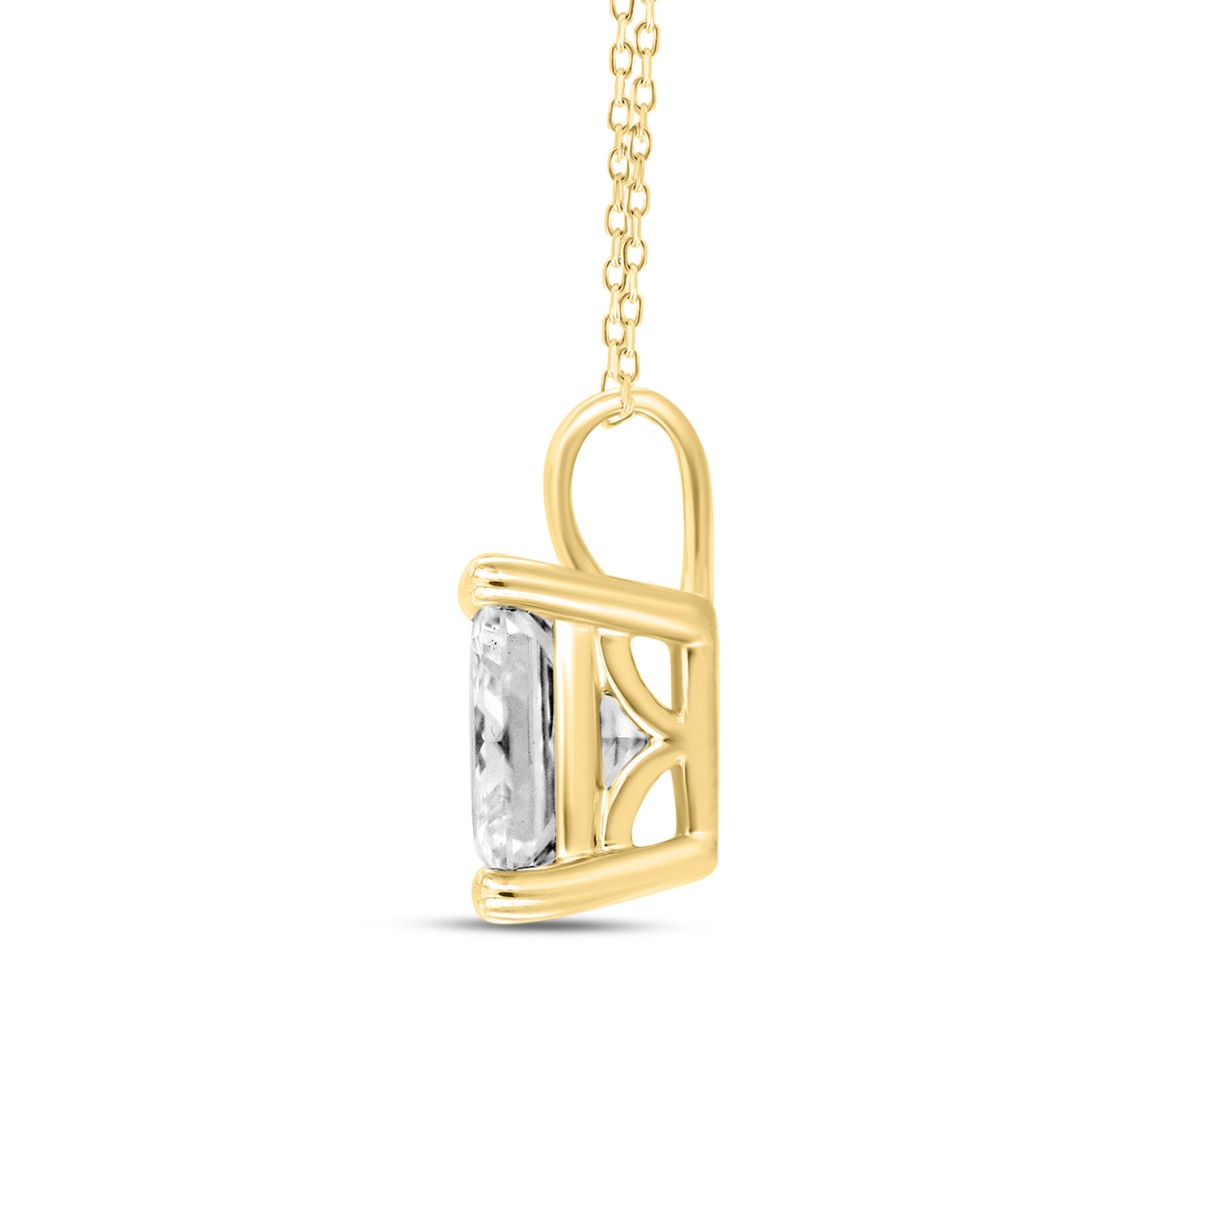 LADIES SOLITAIRE PENDANT WITH CHAIN 2 1/2CT PRINCESS DIAMOND 14K YELLOW GOLD 